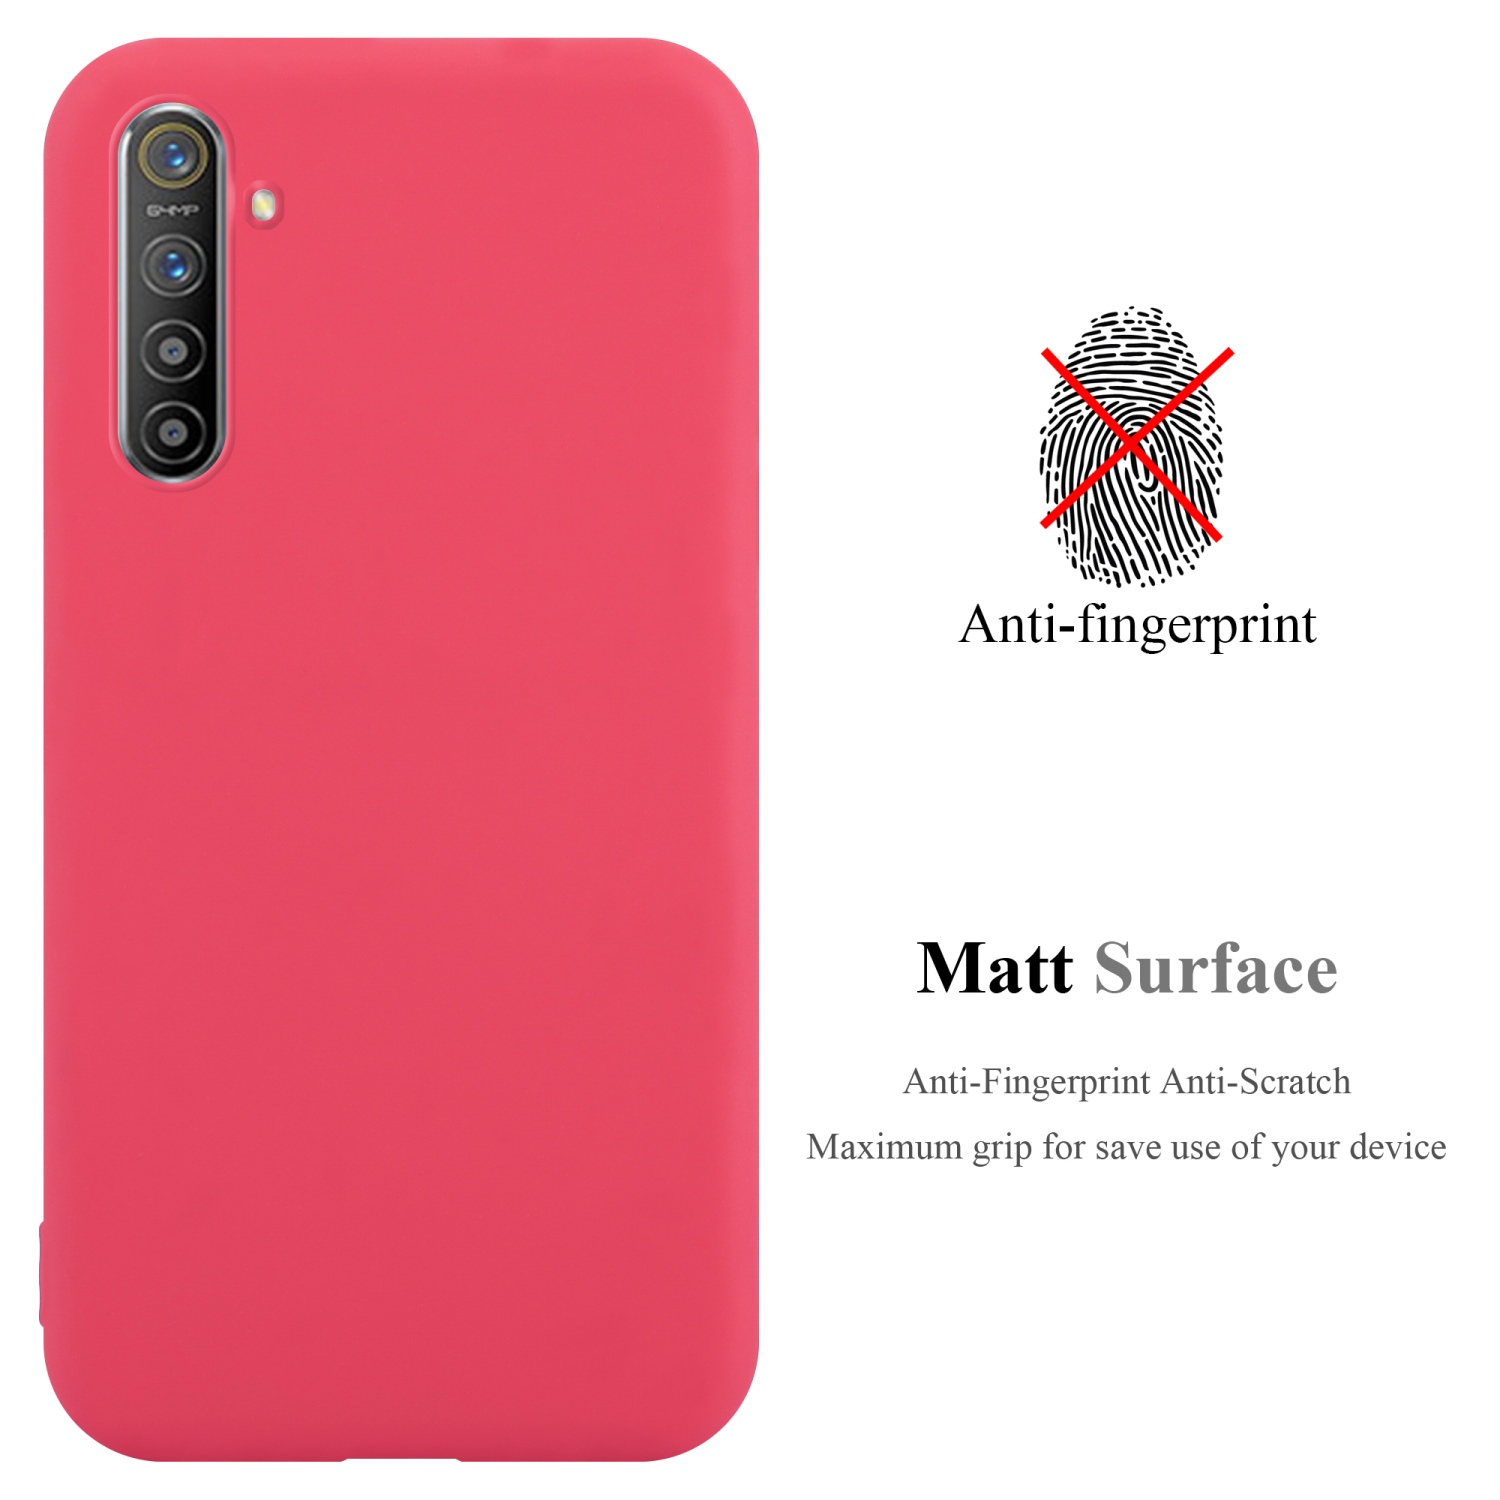 CADORABO Hülle im K5, Oppo Style, Backcover, Candy / X2 XT ROT TPU / CANDY Realme